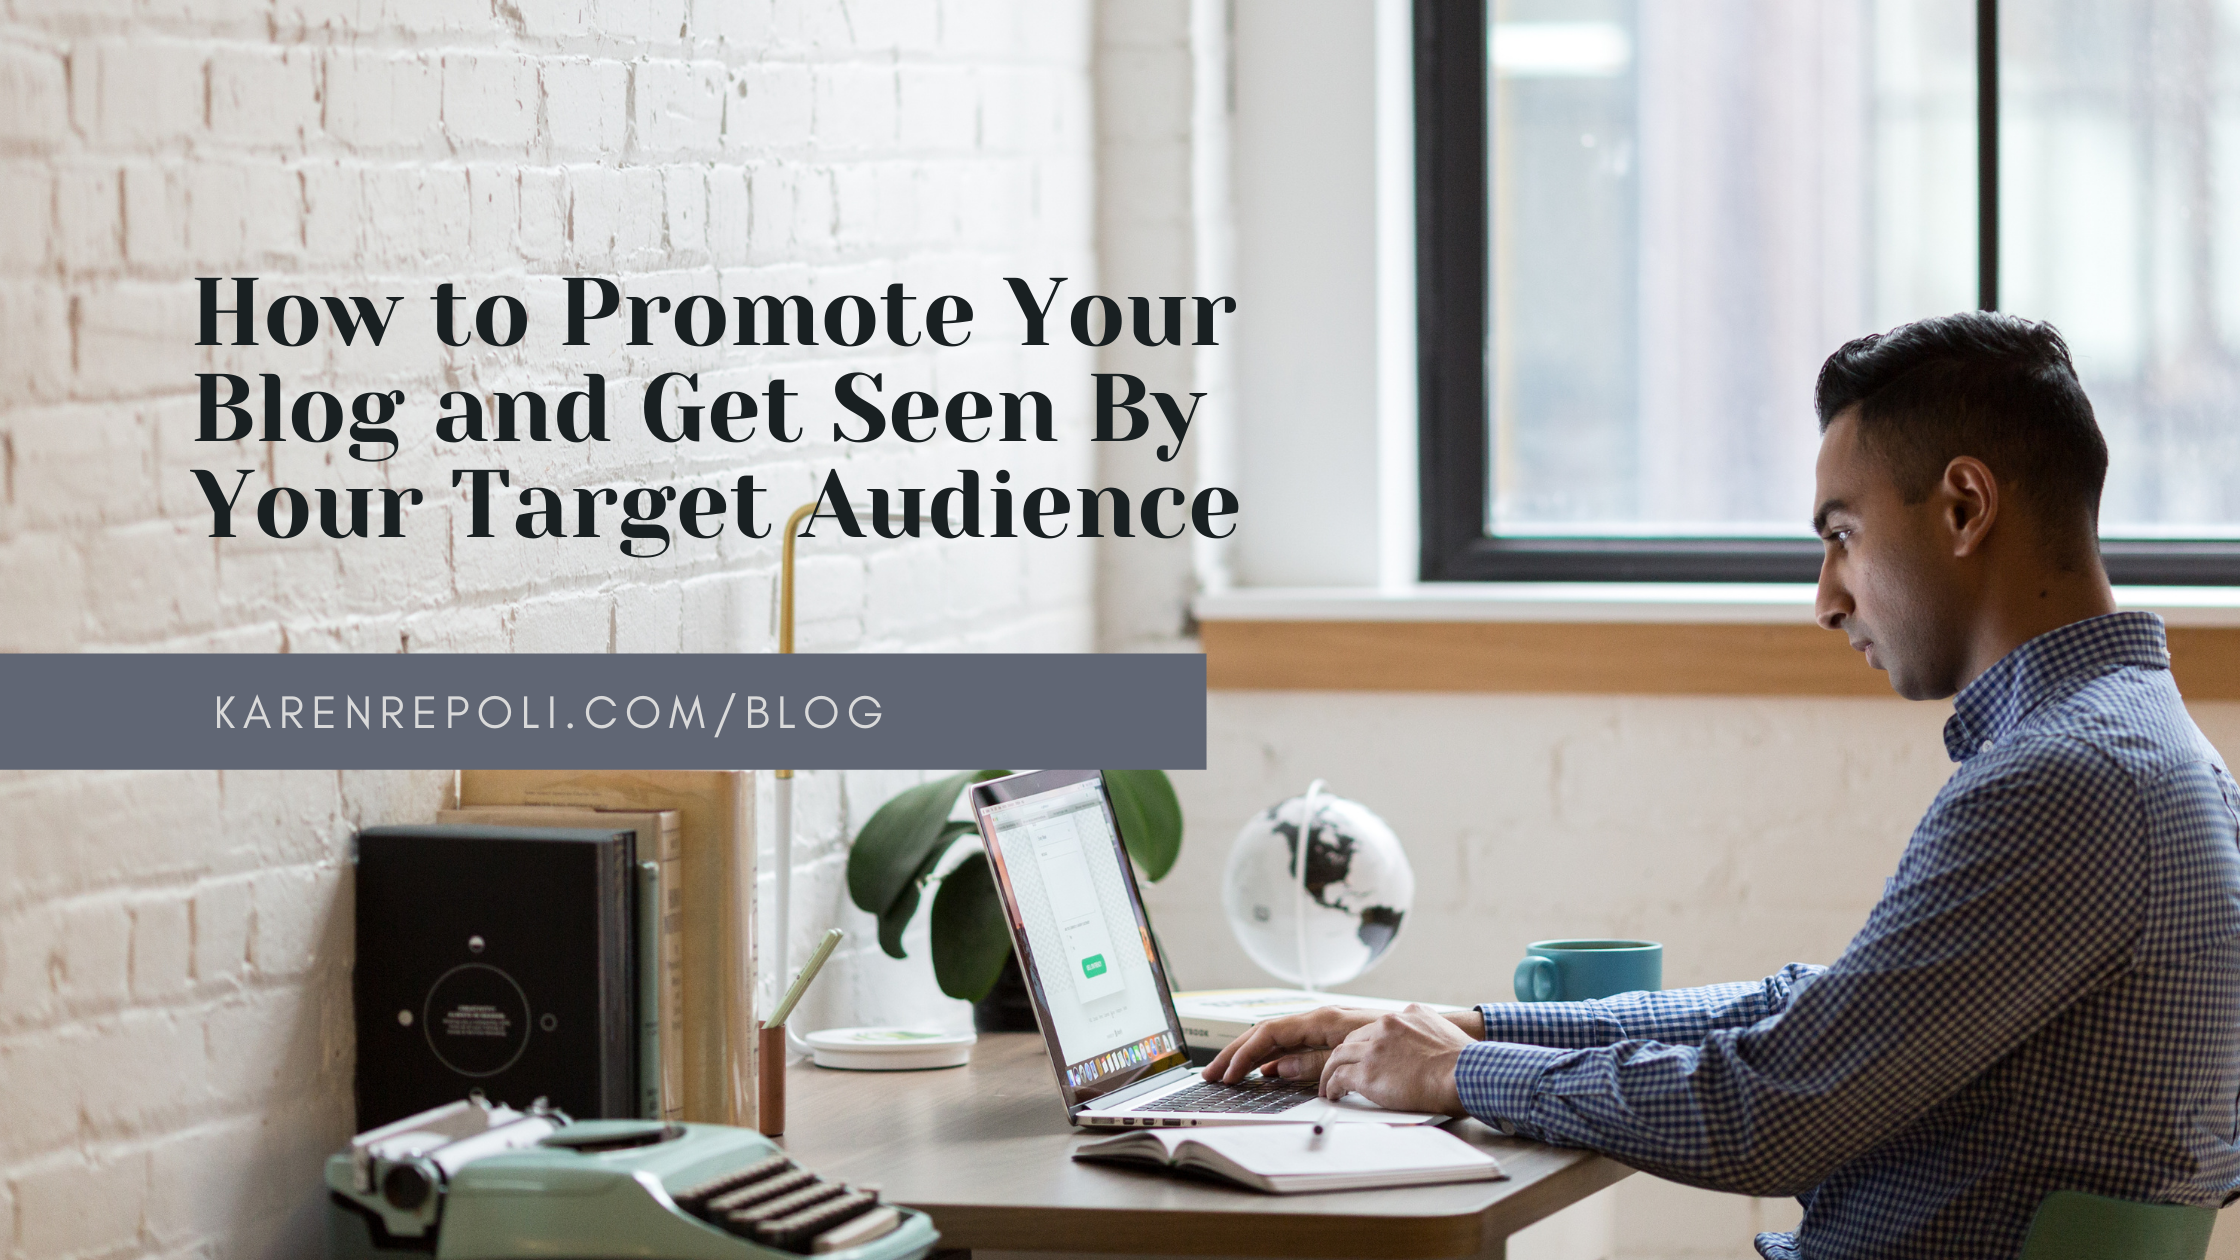 How to Promote Your Blog and Get Seen By Your Target Audience